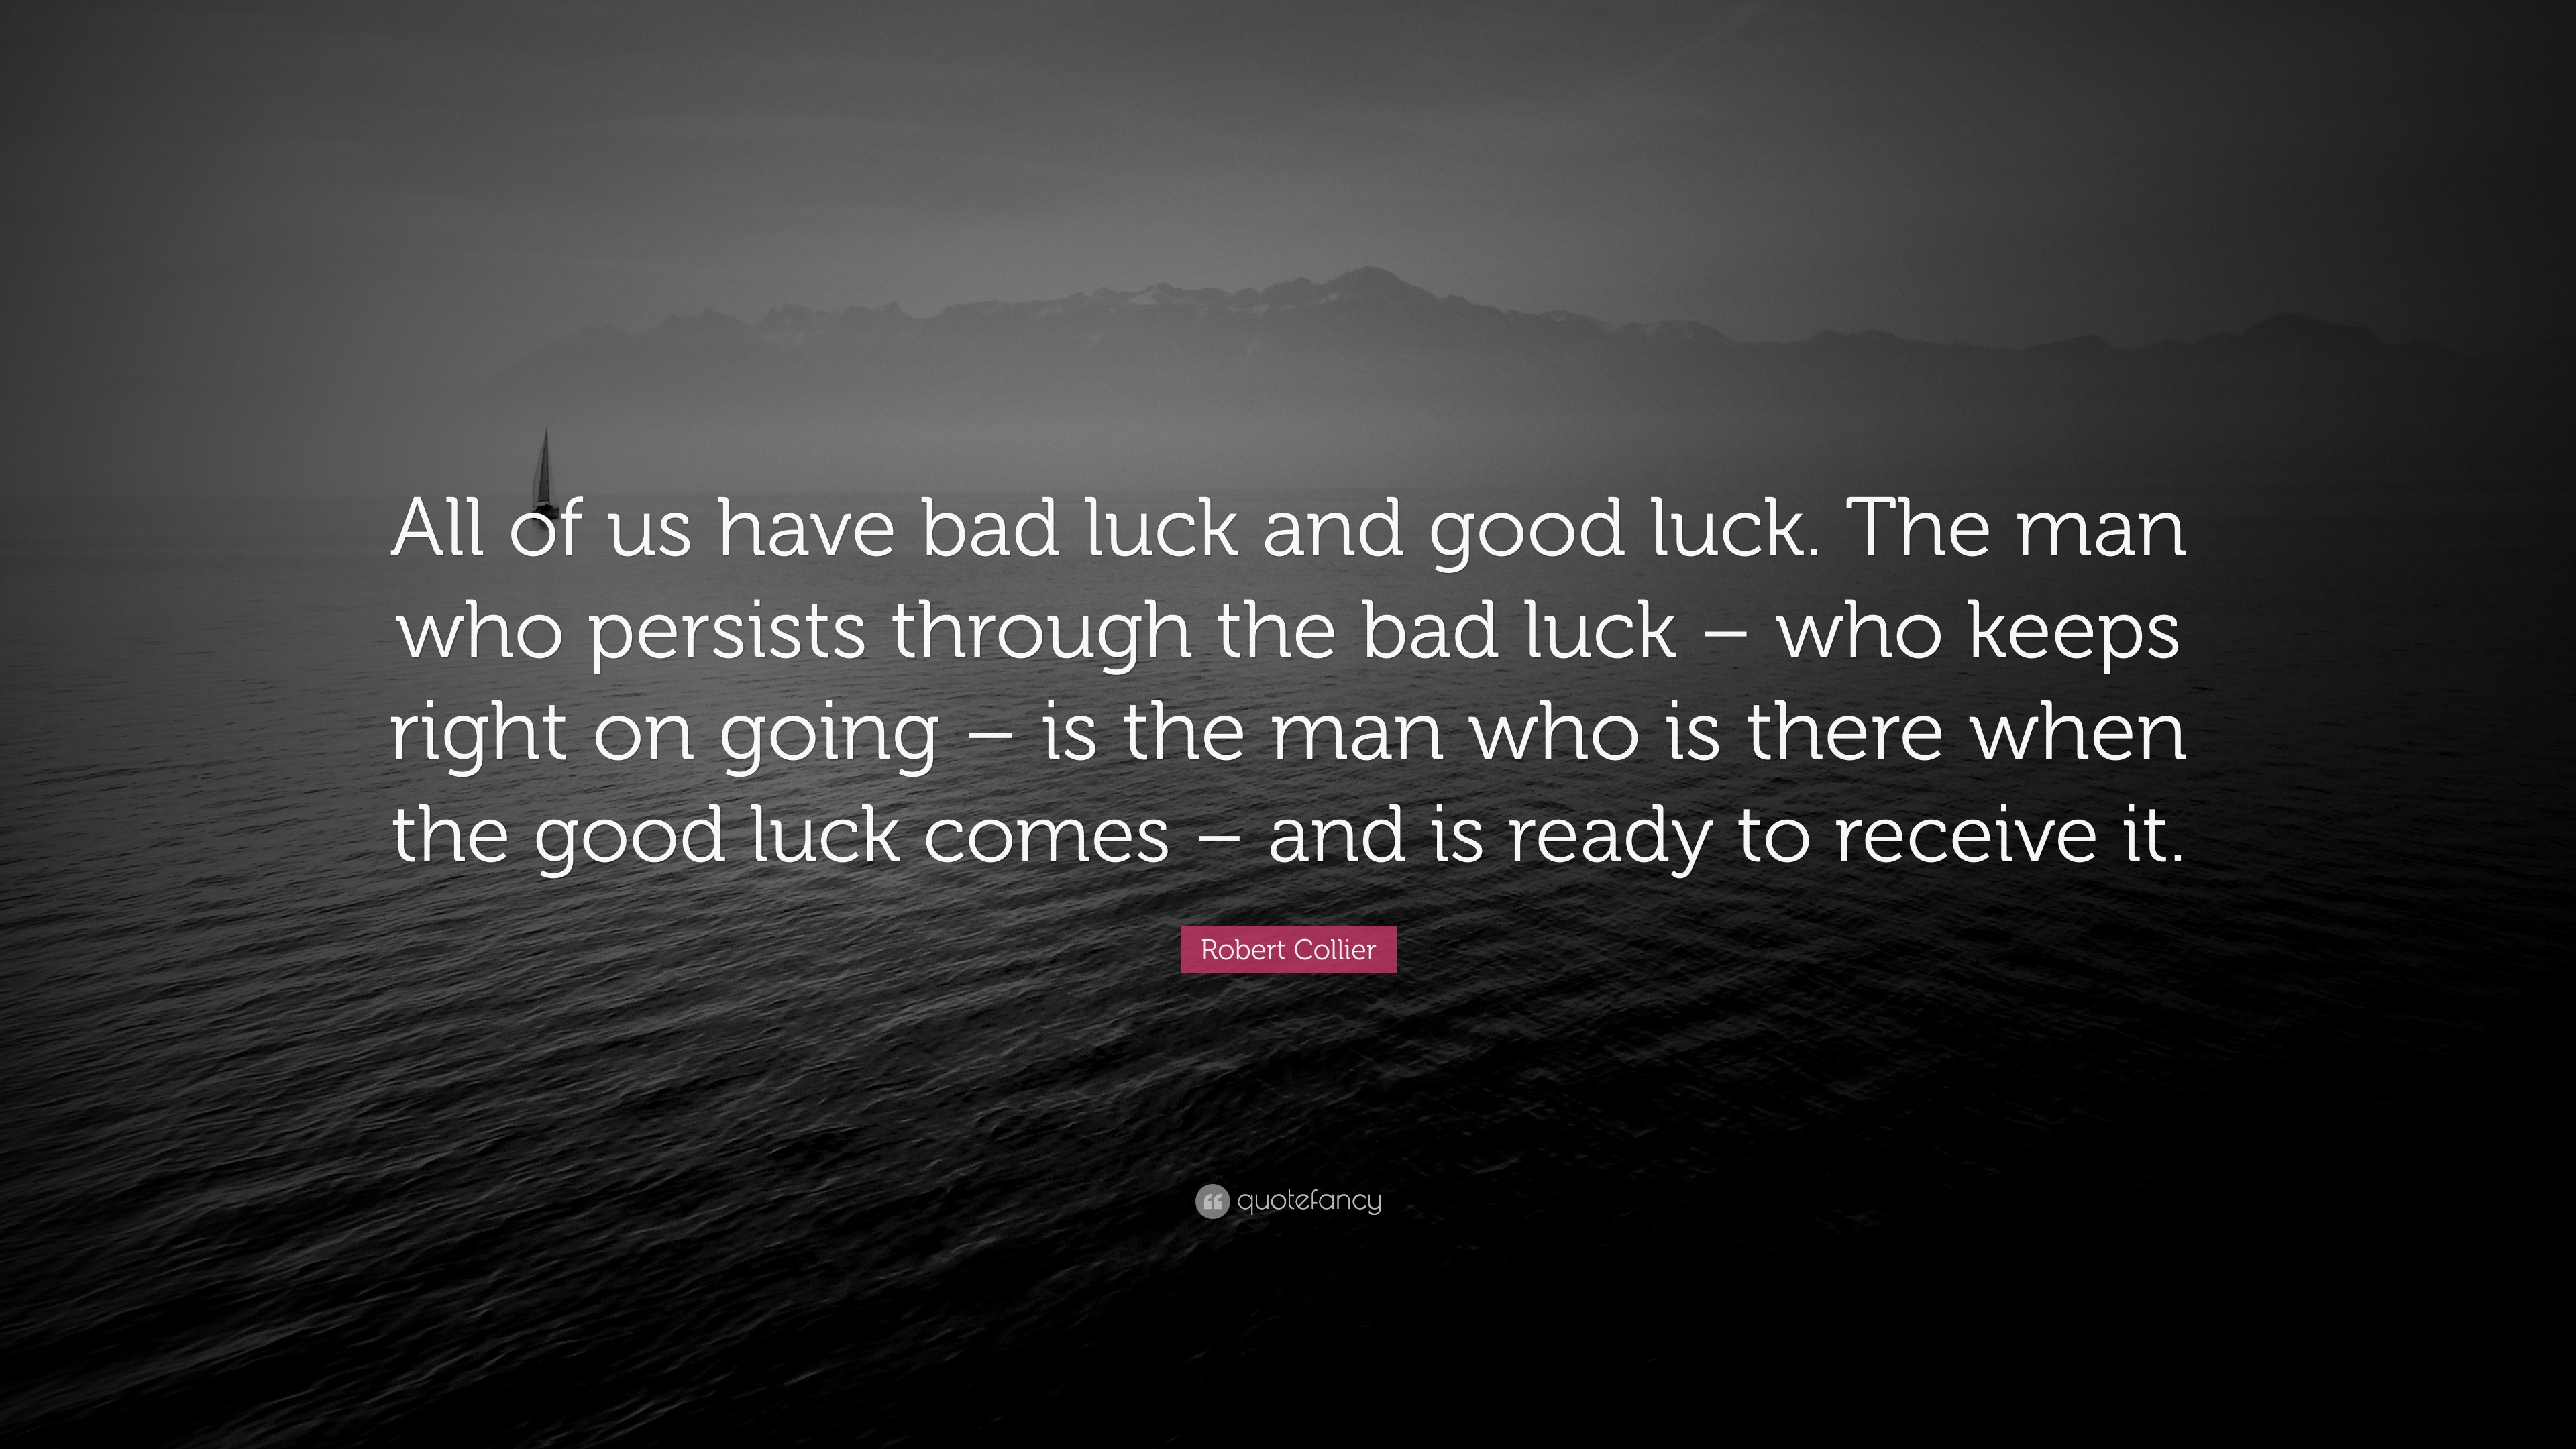 Robert Collier Quote: “All of us have bad luck and good luck. The man who  persists through the bad luck – who keeps right on going – is the man...”